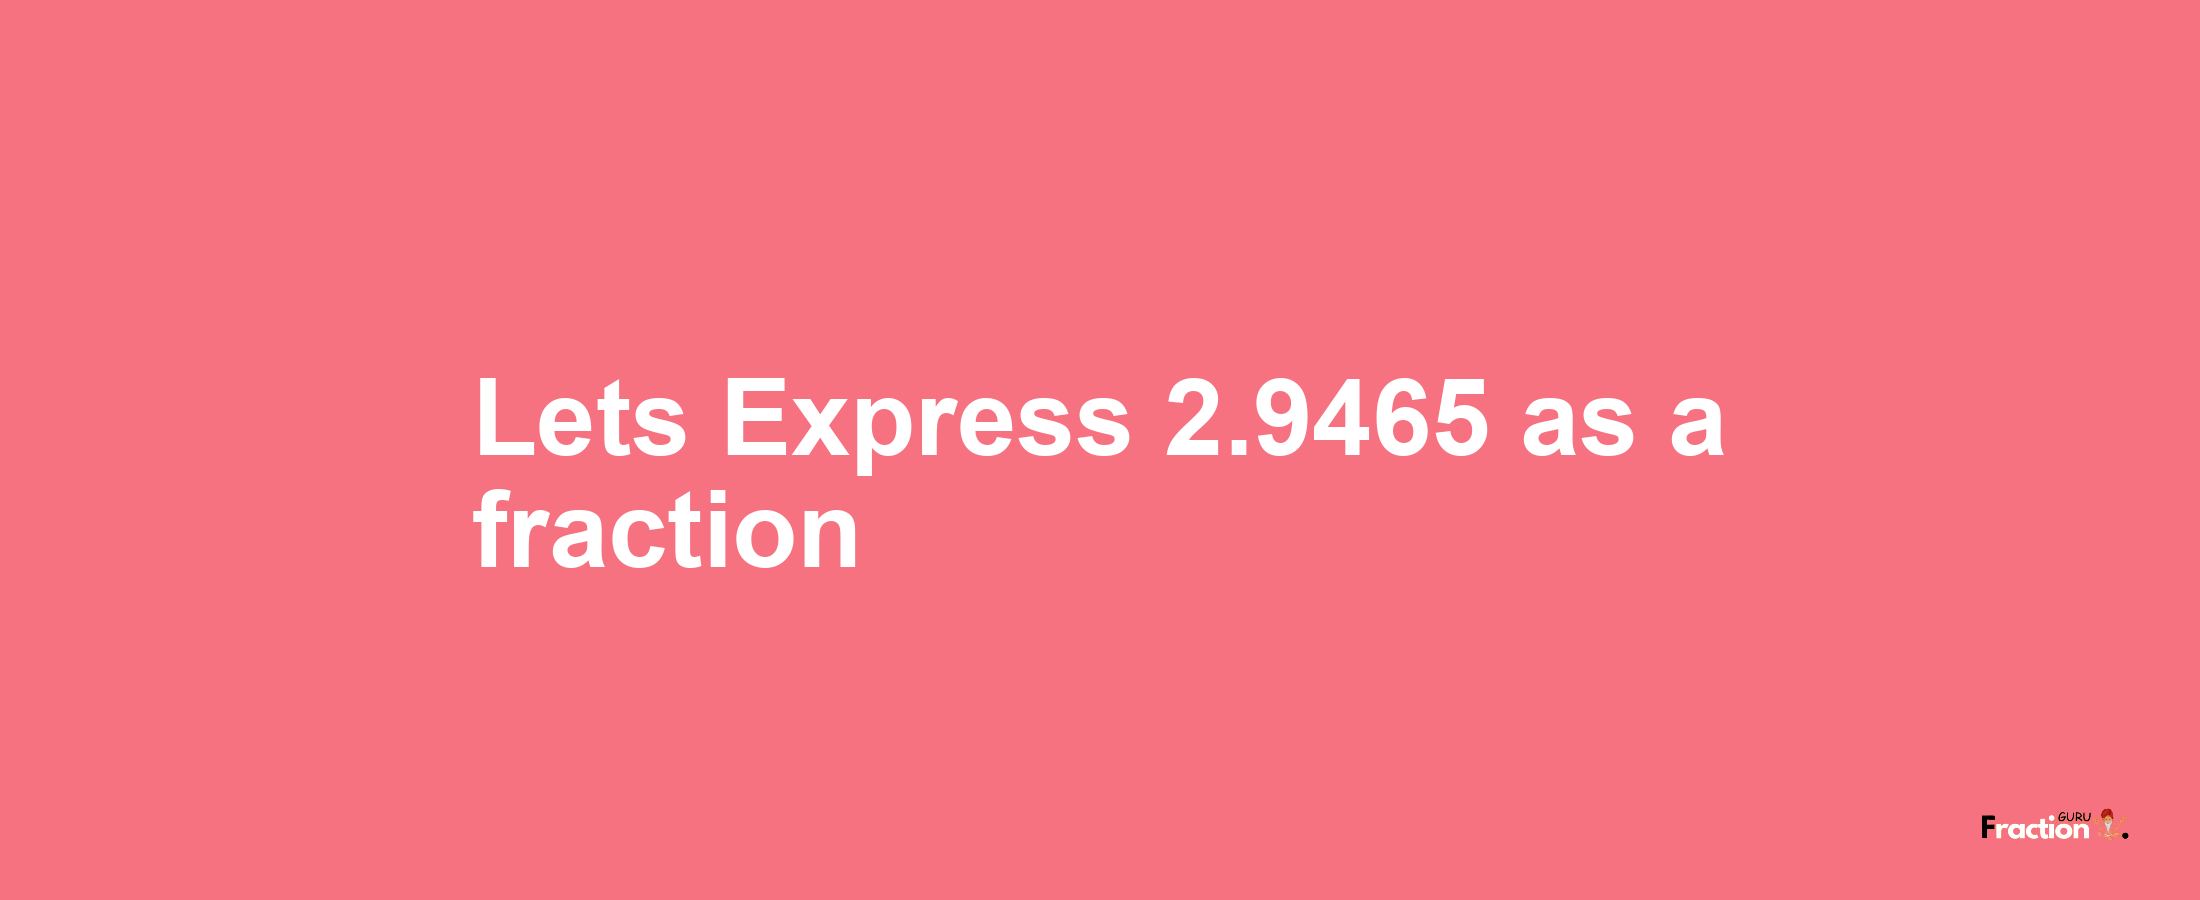 Lets Express 2.9465 as afraction